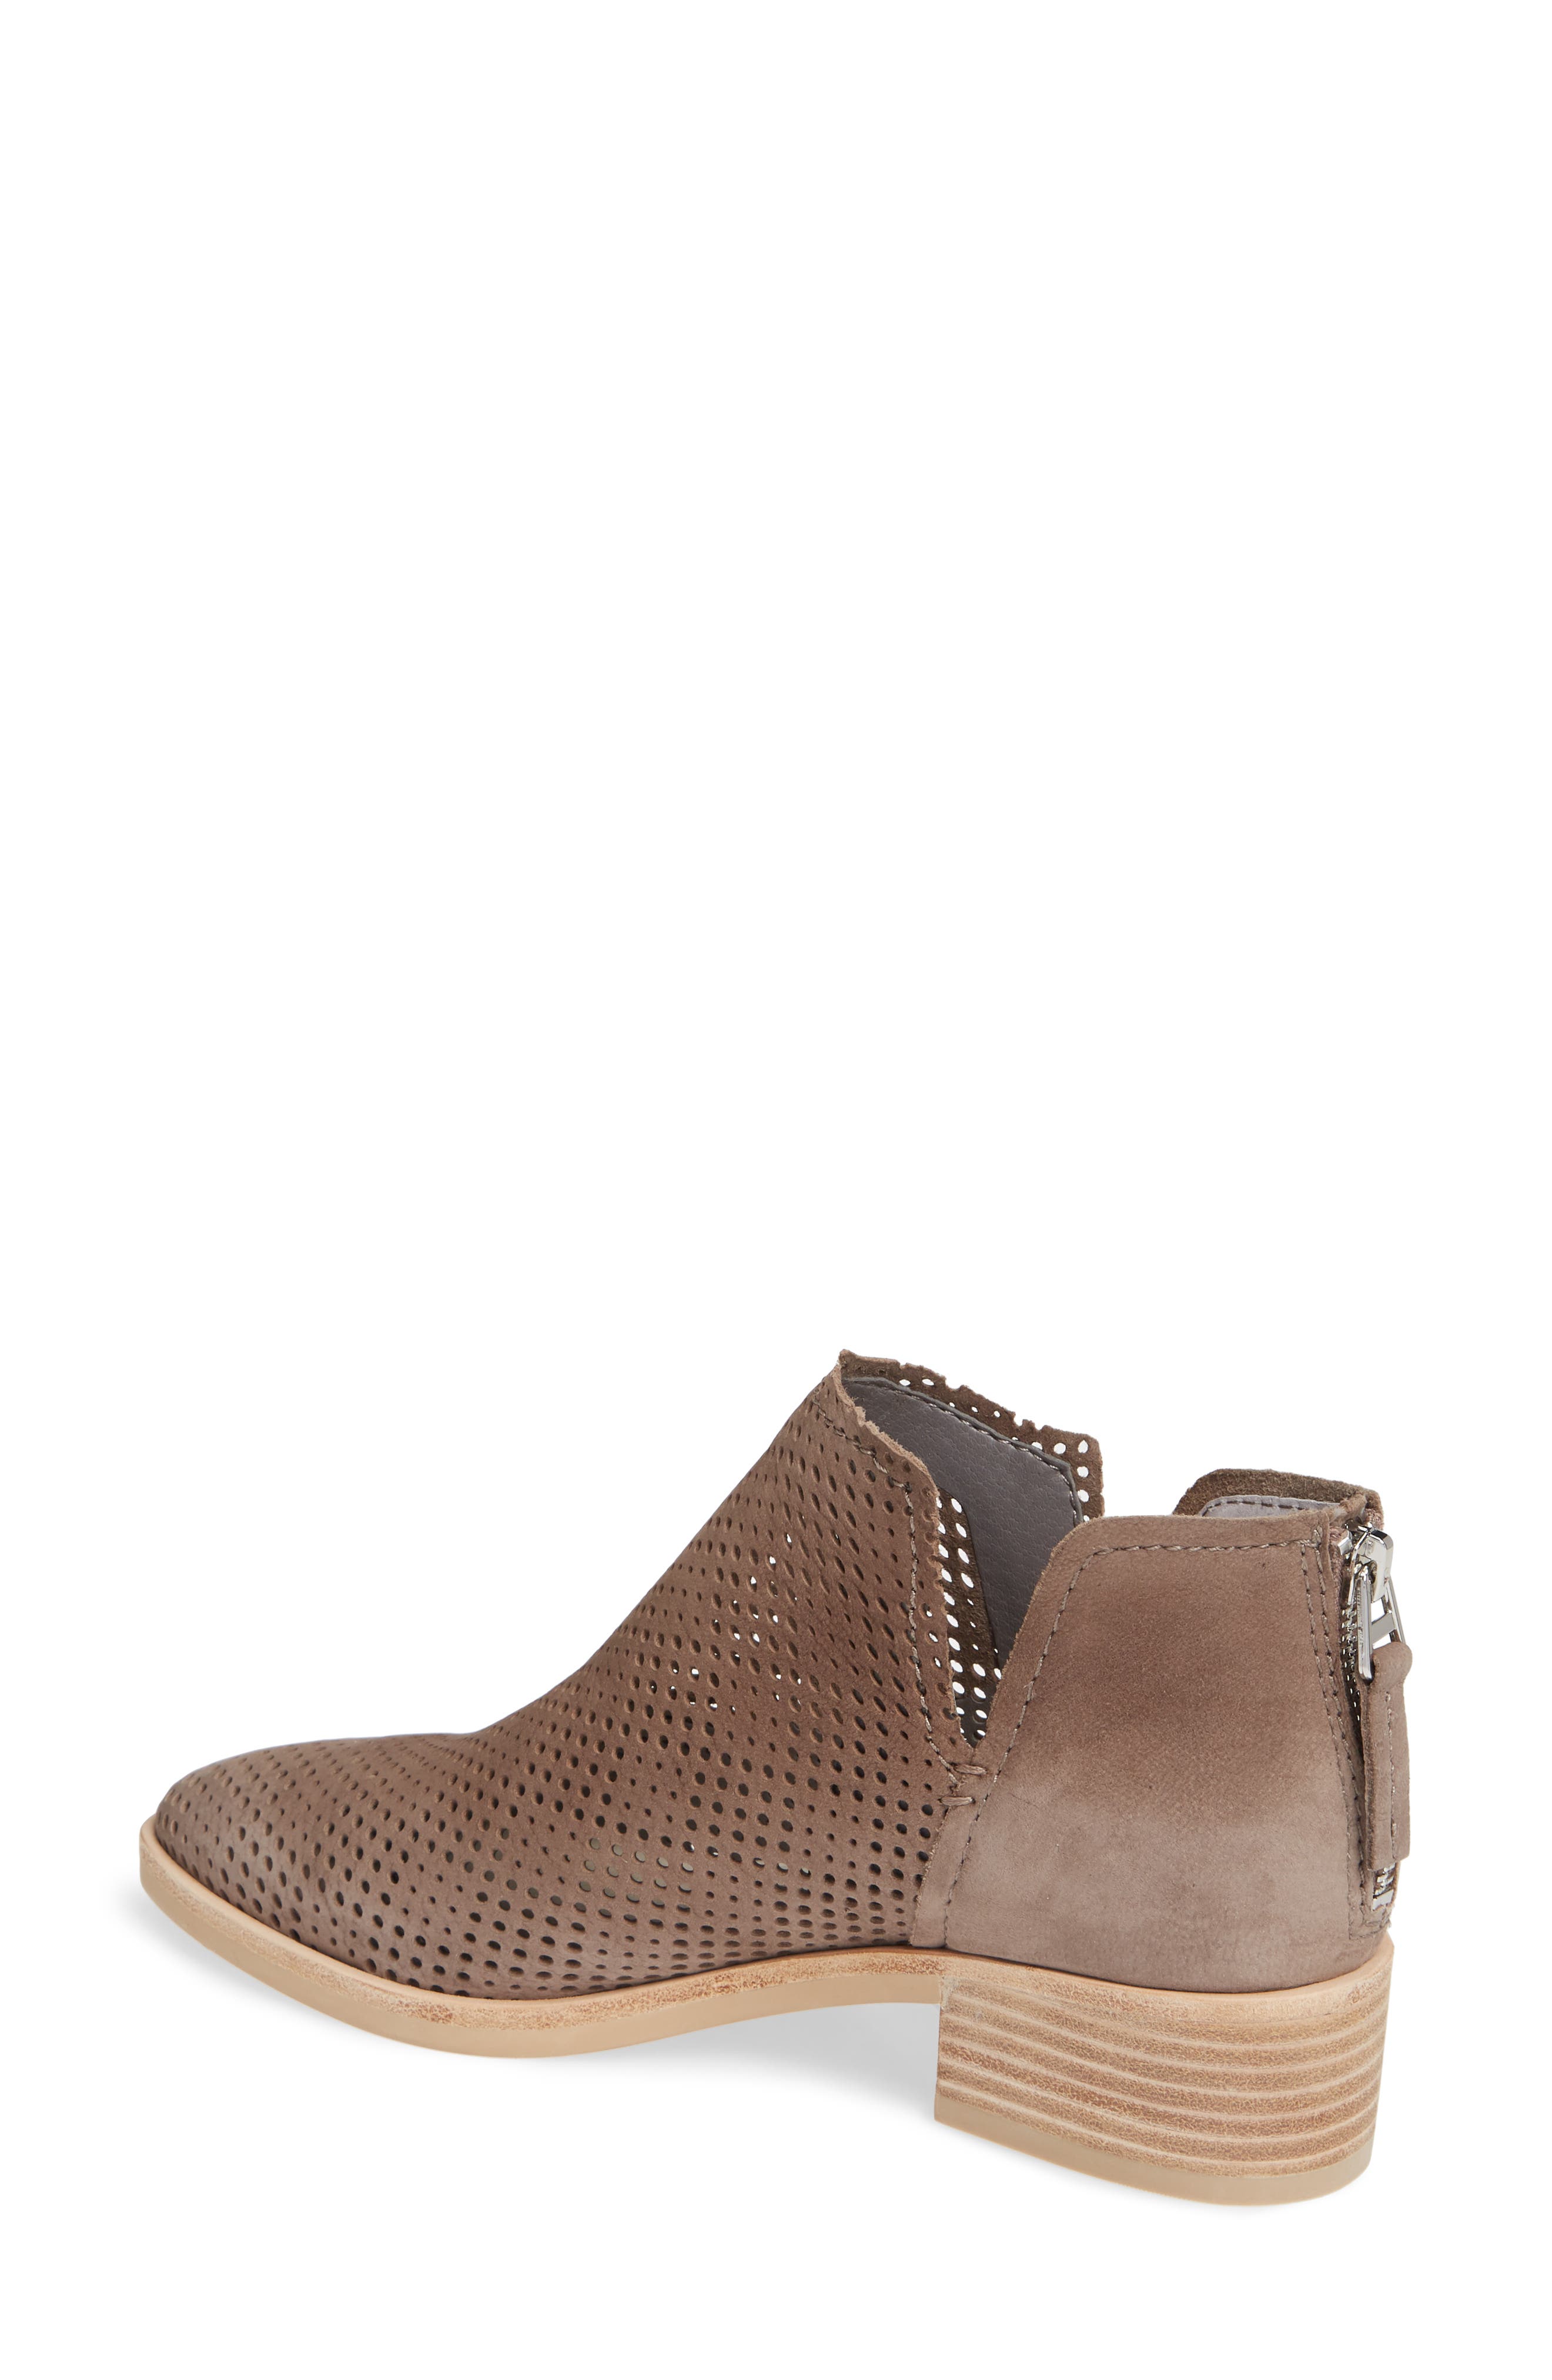 Dolce Vita | Tauris Perforated Bootie 